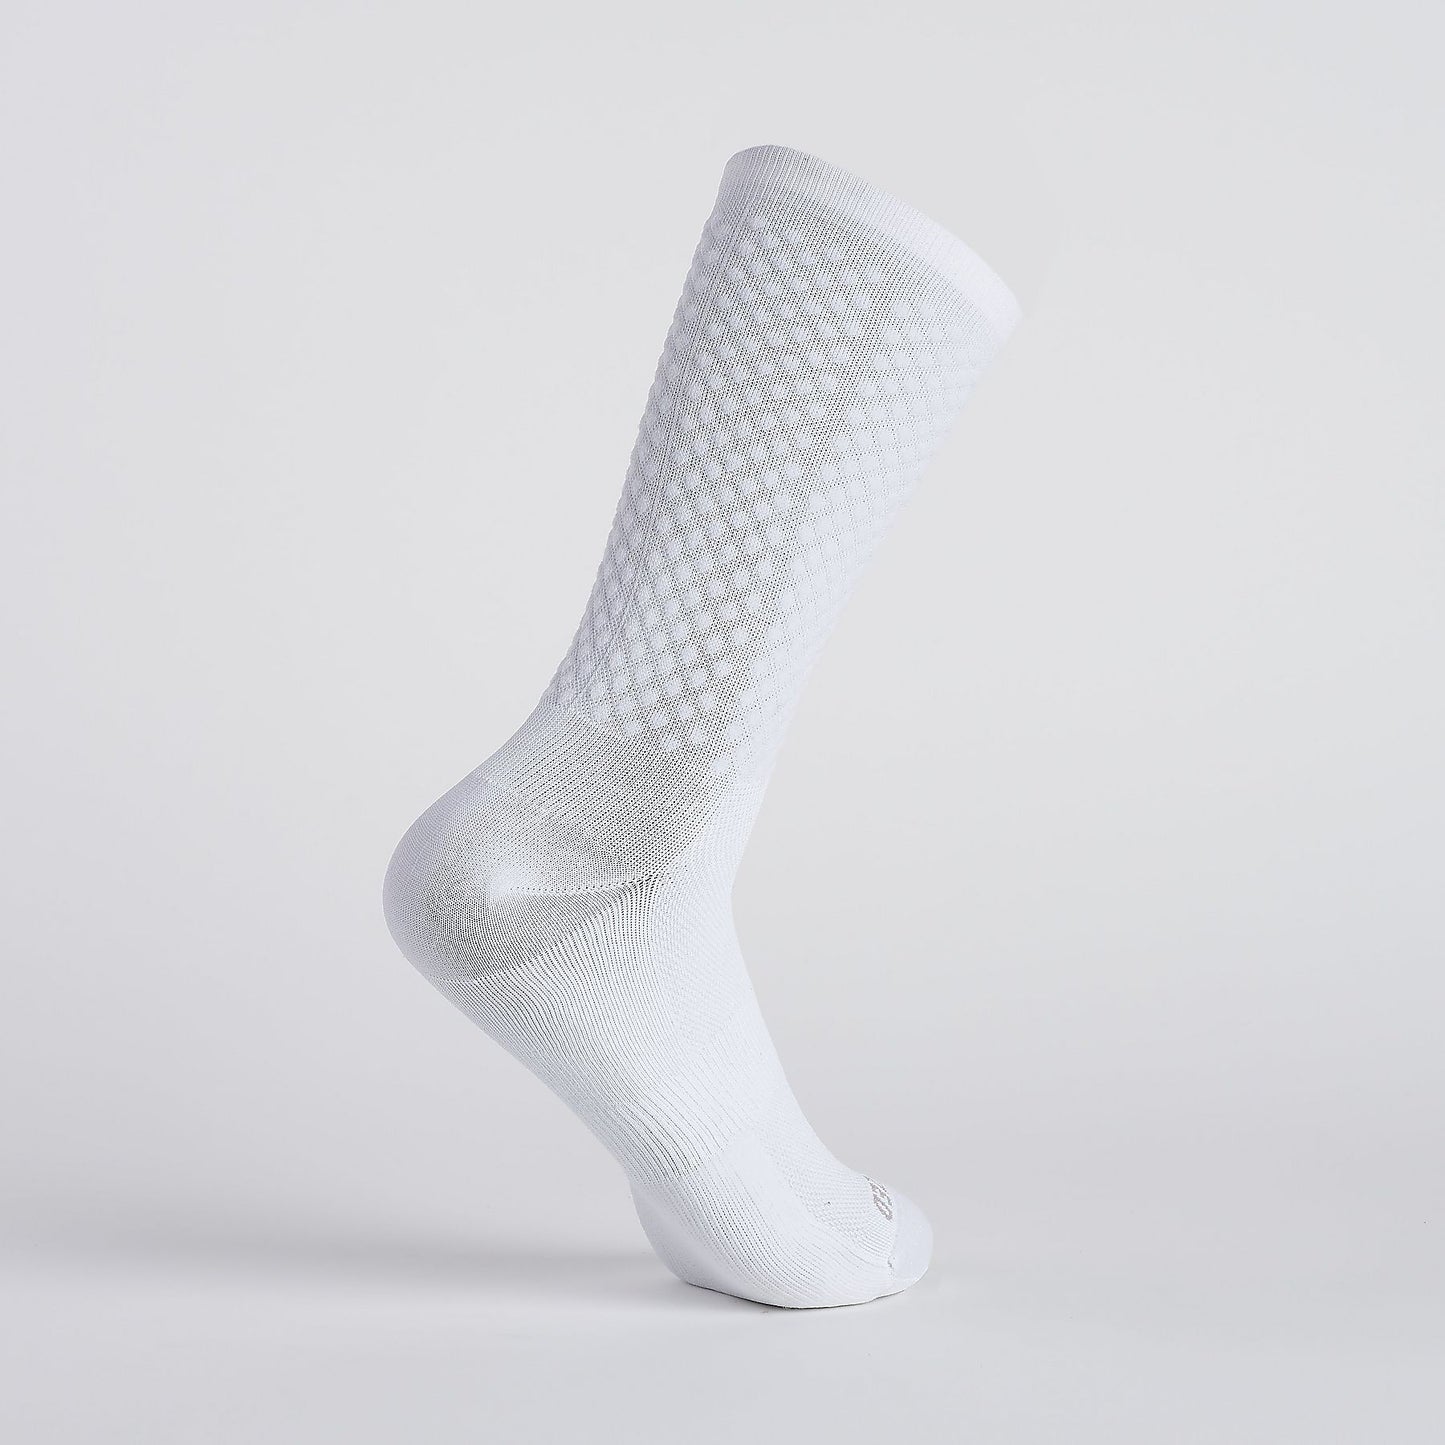 Knit Tall Sock in White/Silver